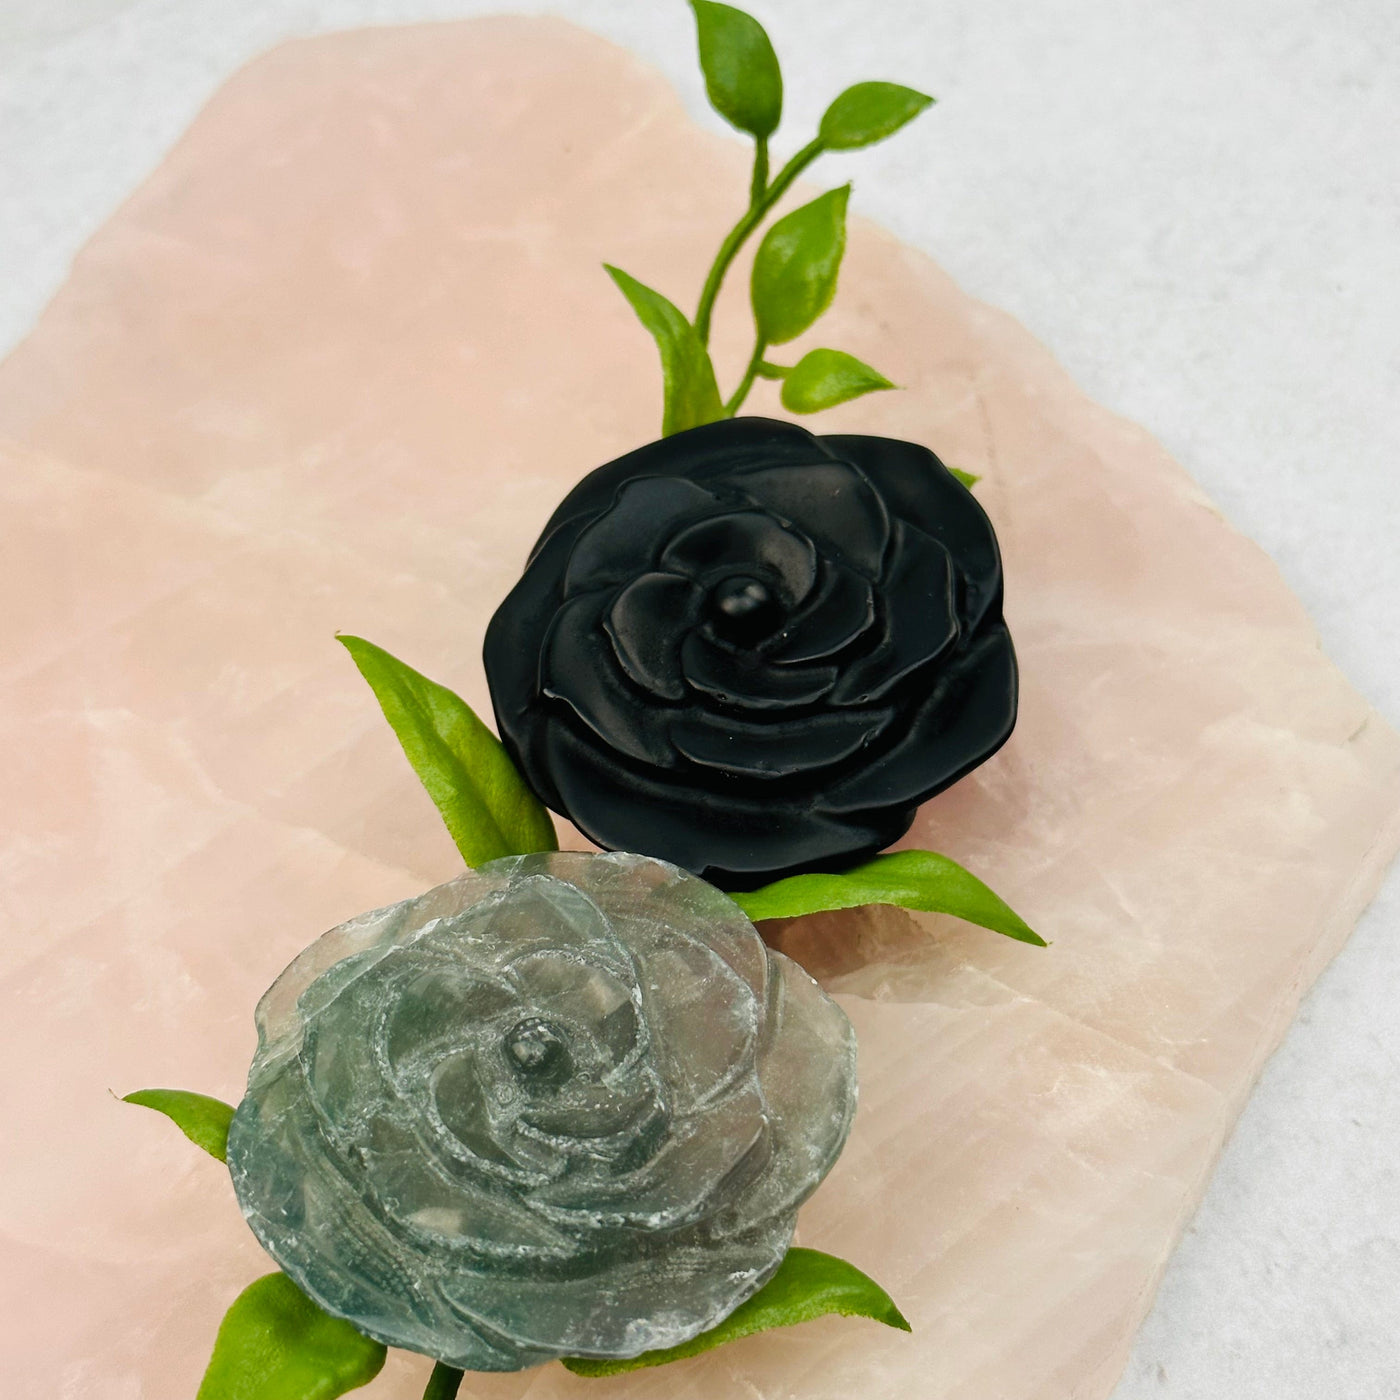 Gemstone Hand Carved Open Rose displayed as home decor 